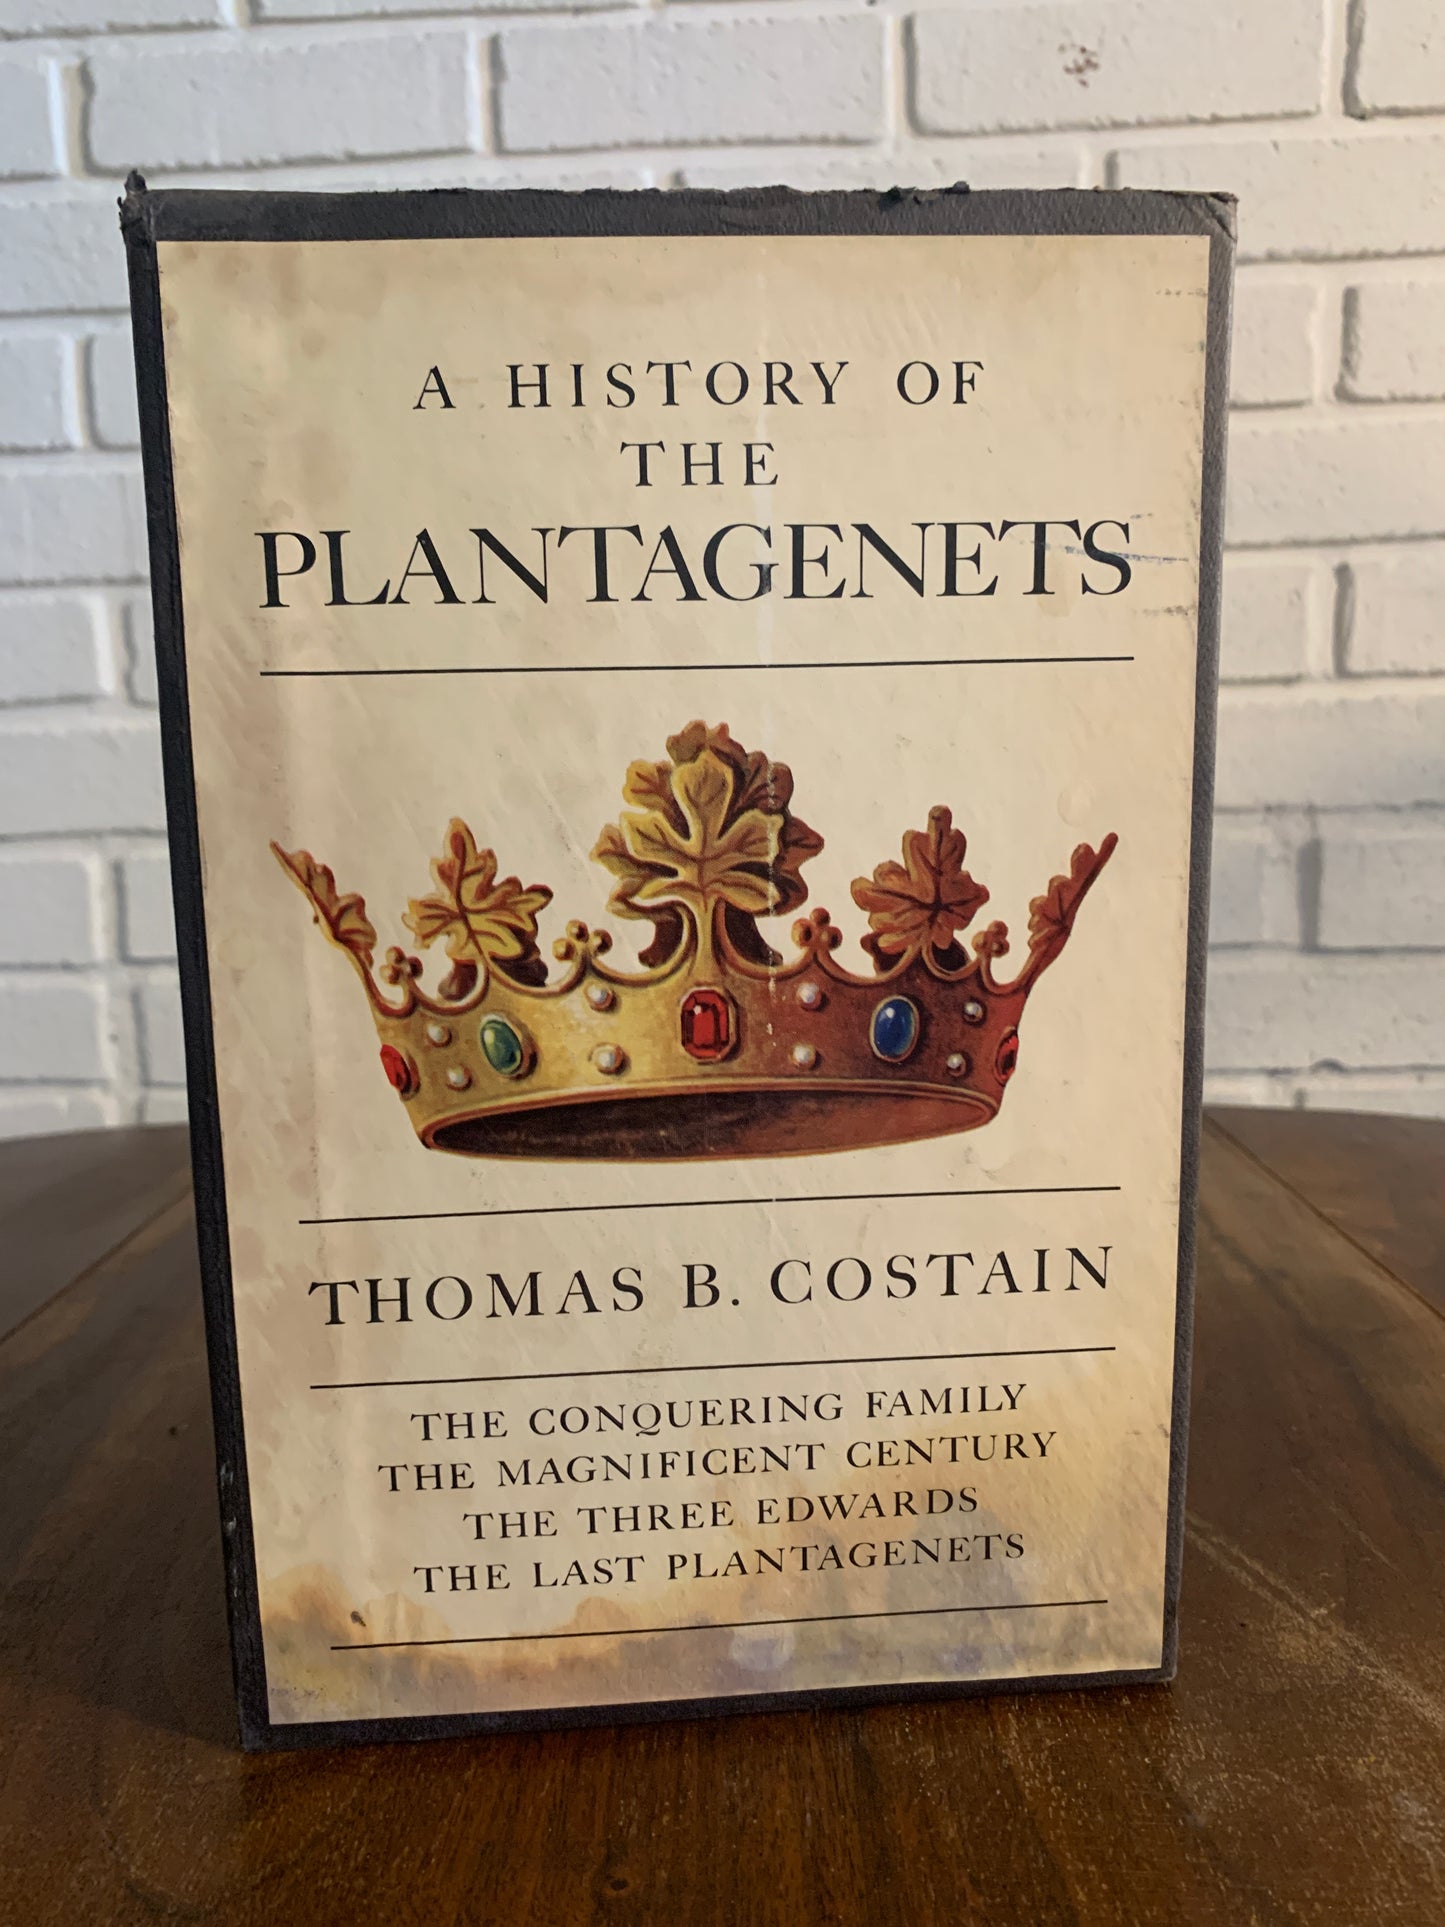 A History of the Plantagenets by Thomas Costain [1962 4 Volumes]